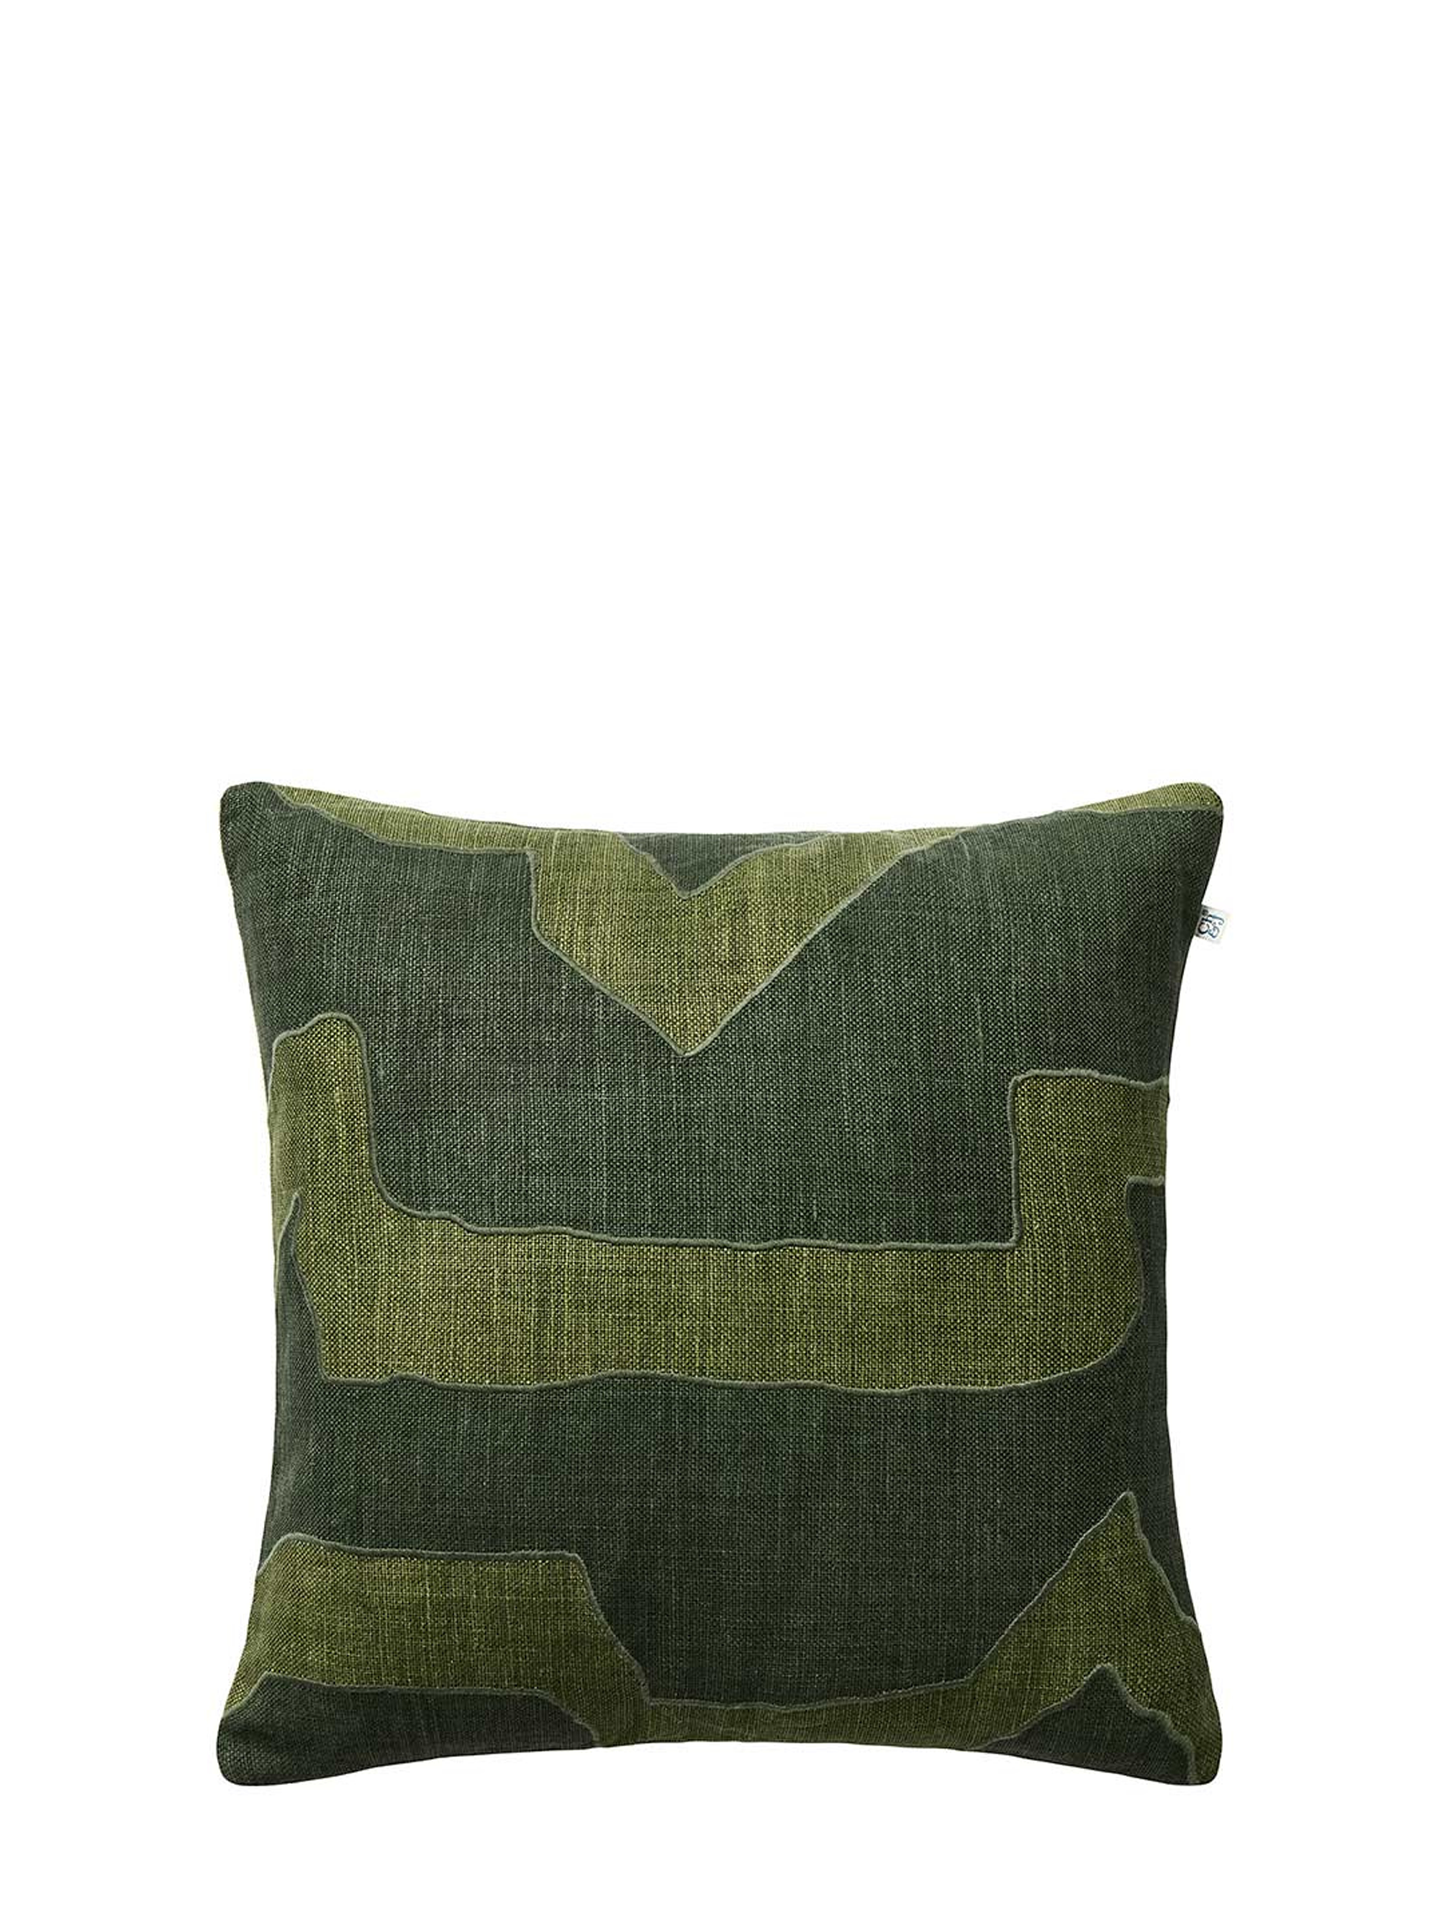 Sikkim Cushion Cover, Green